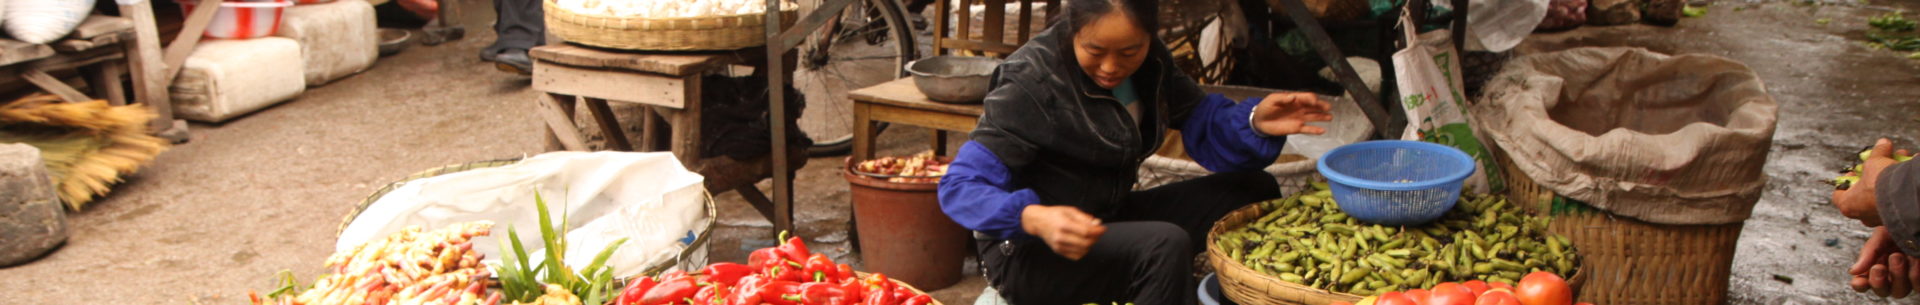 Initiative: Resource Centres on Urban Agriculture and Food Security - South and South East Asia